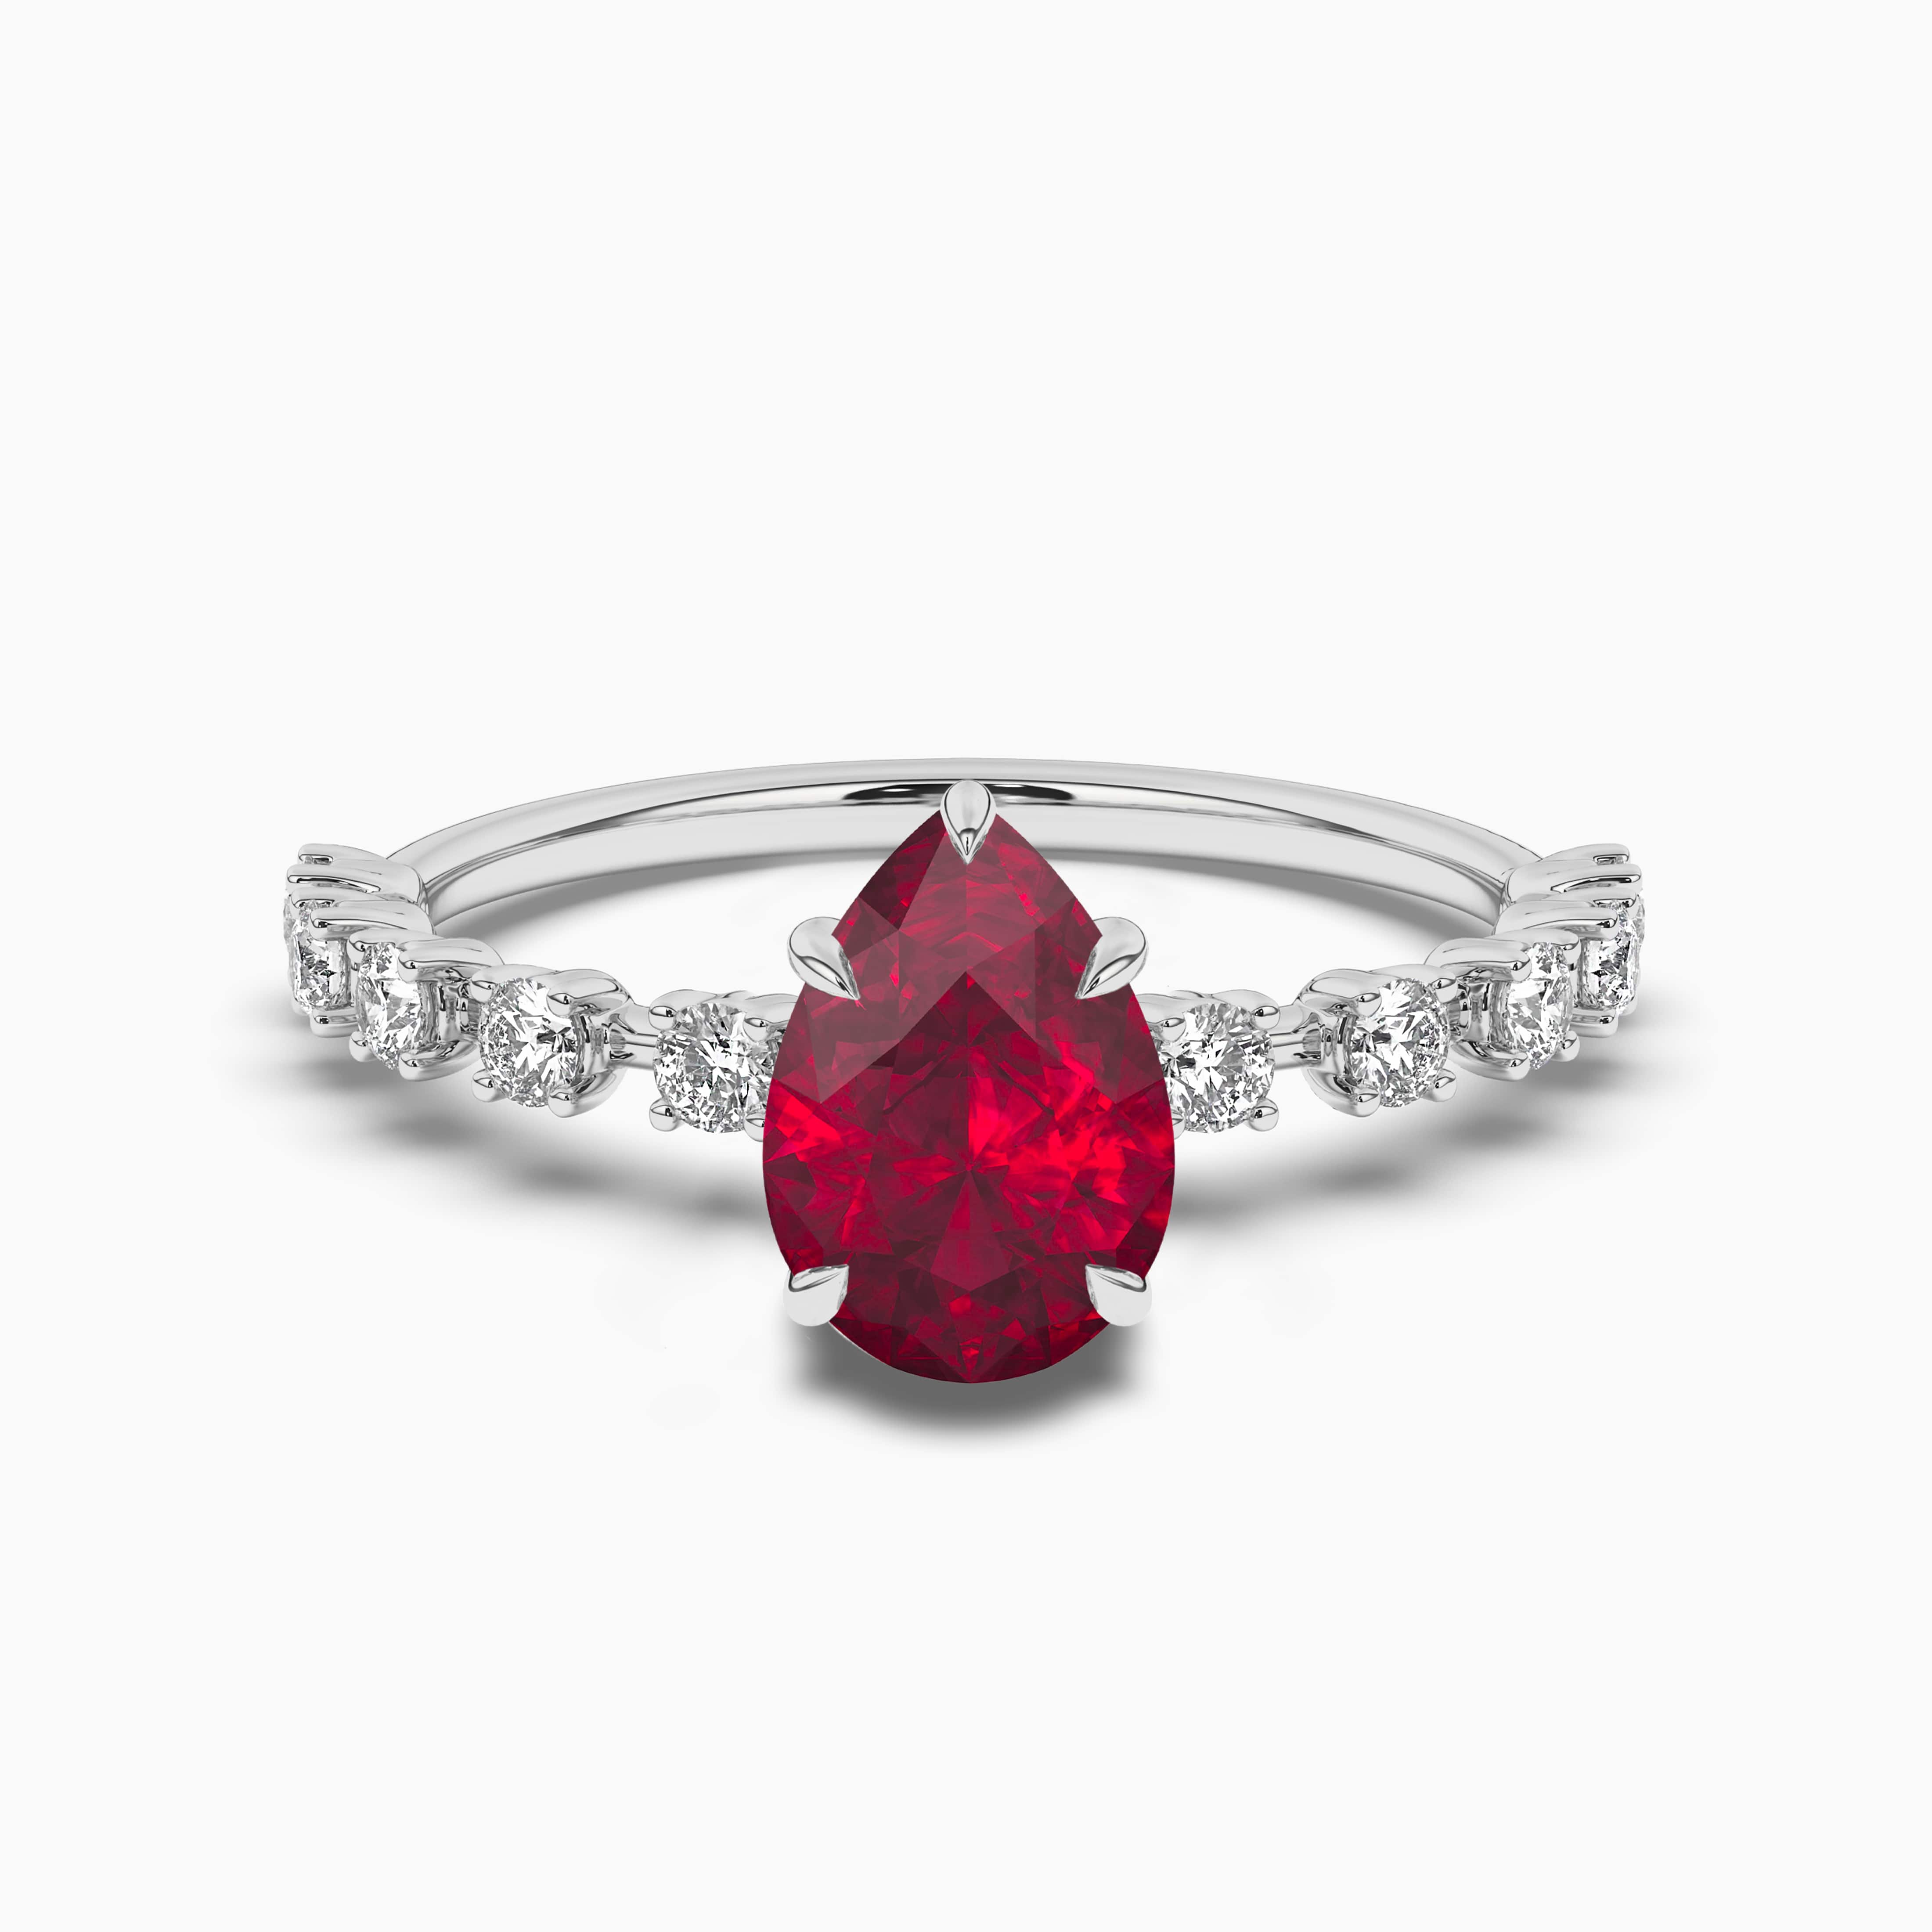 Pear Shaped Ruby Engagement Ring Set White Gold